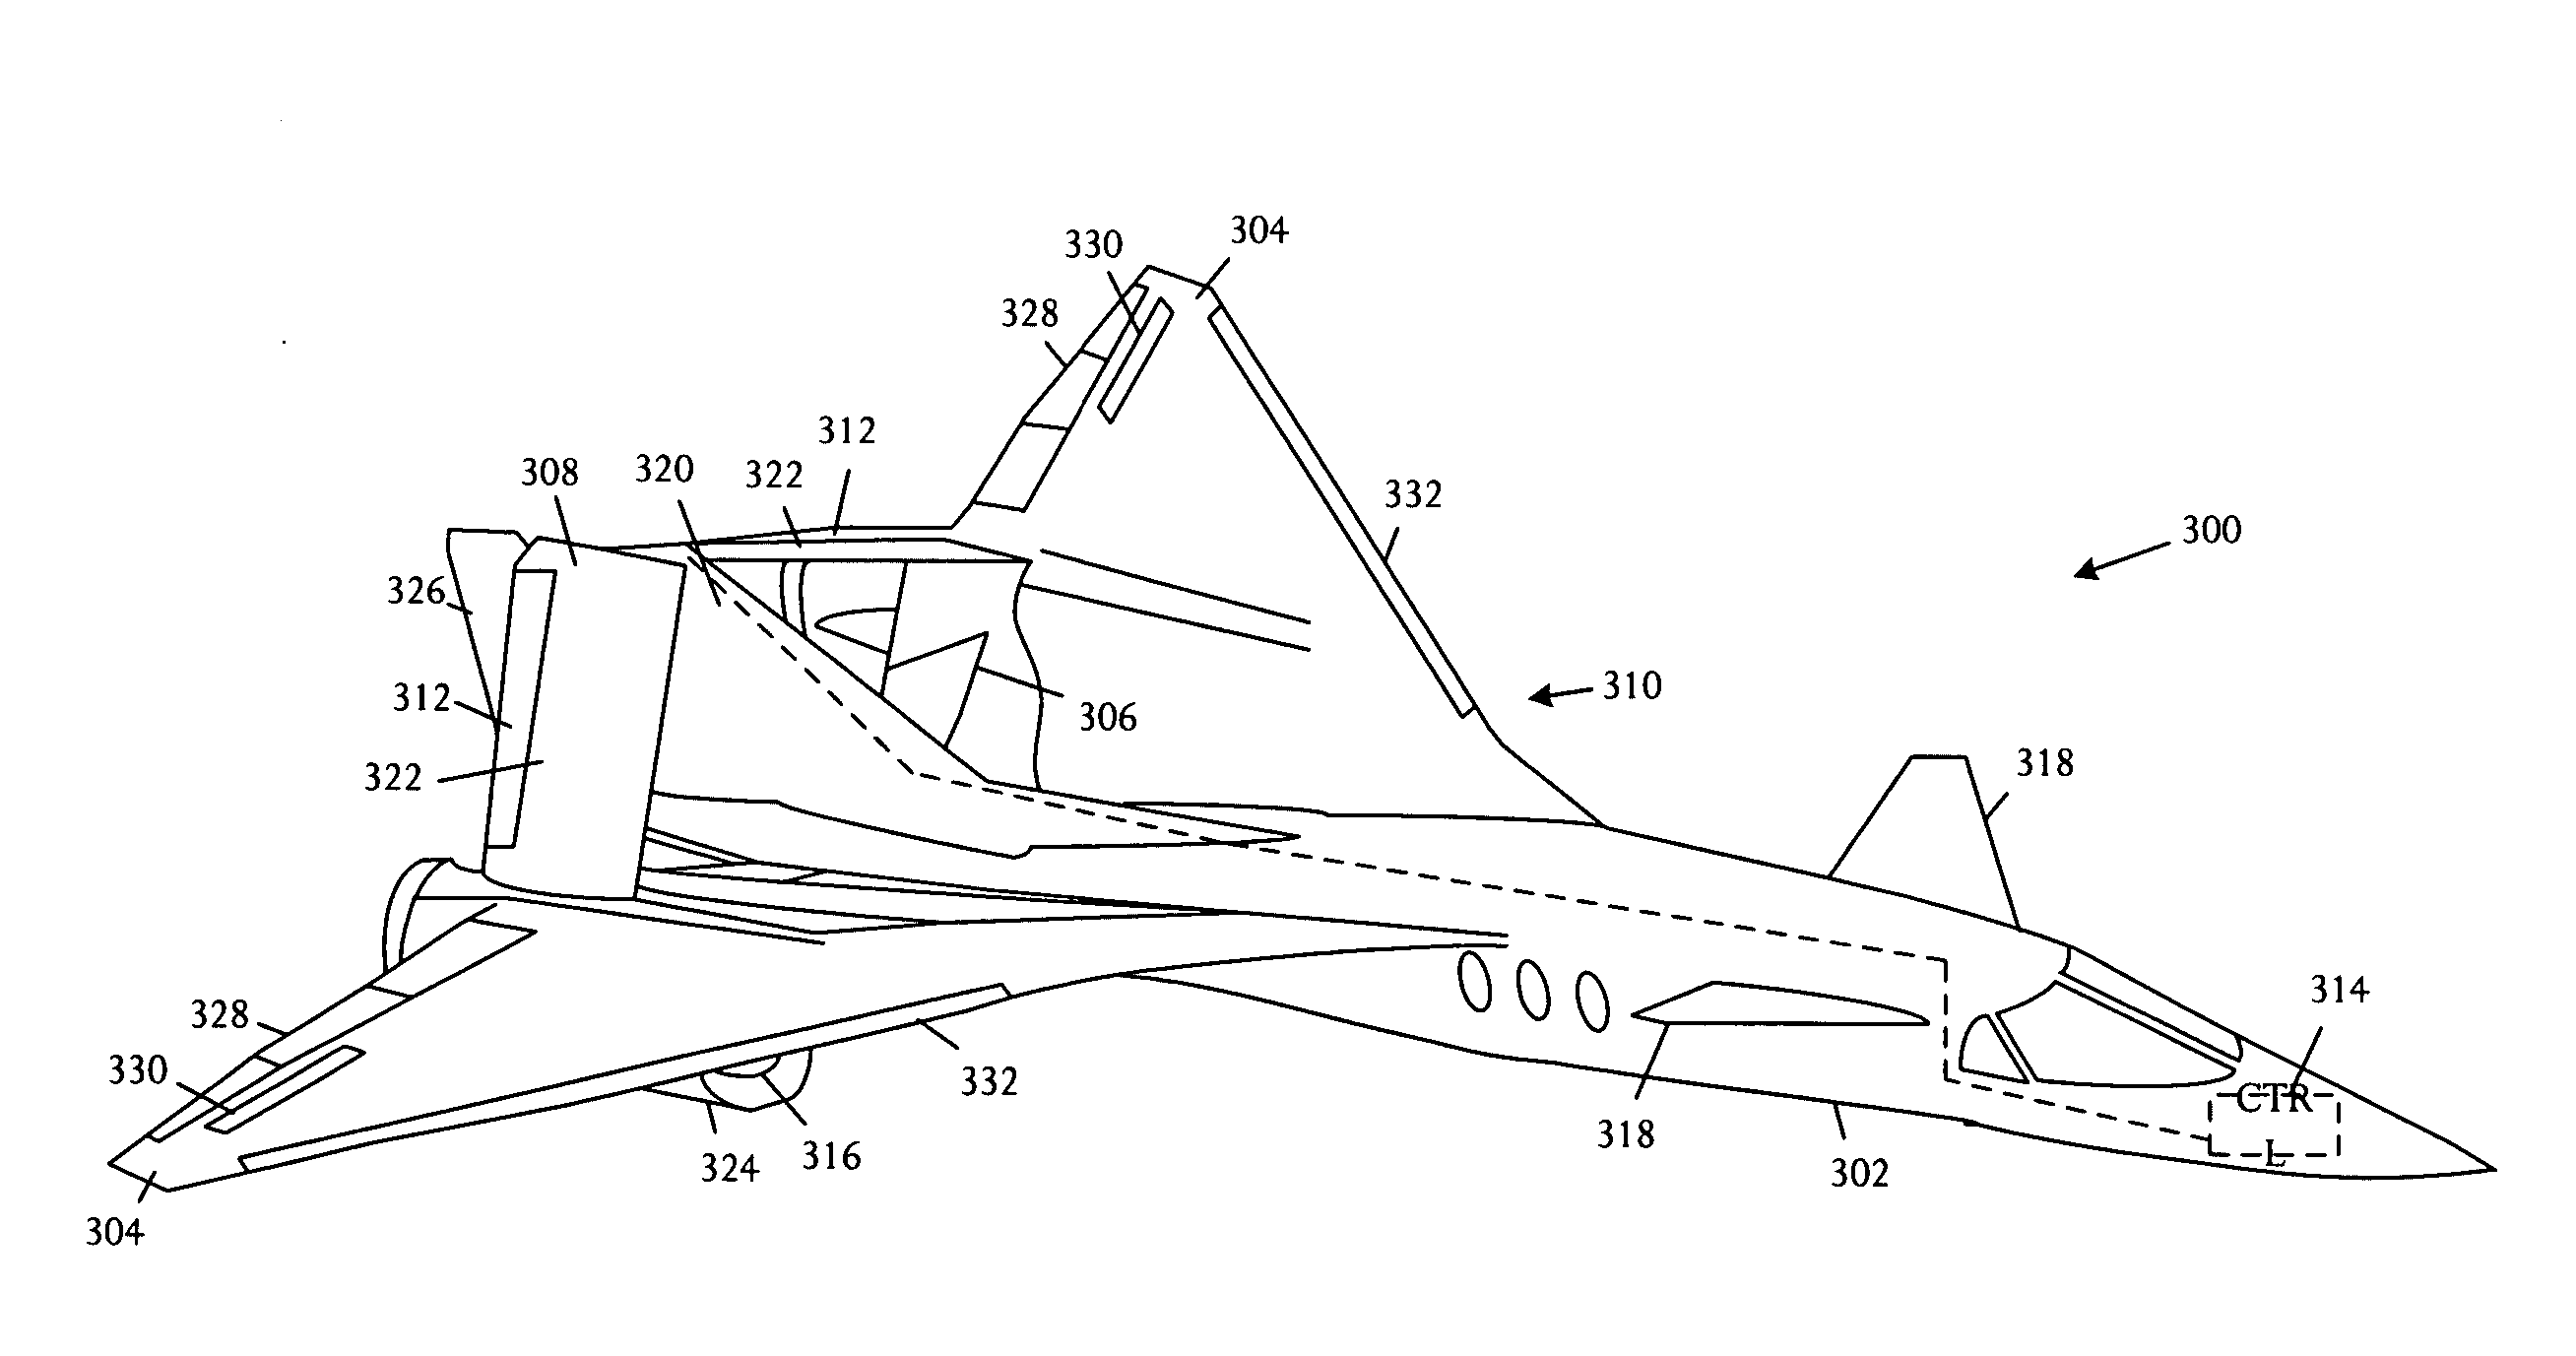 Supersonic aircraft with channel relief control